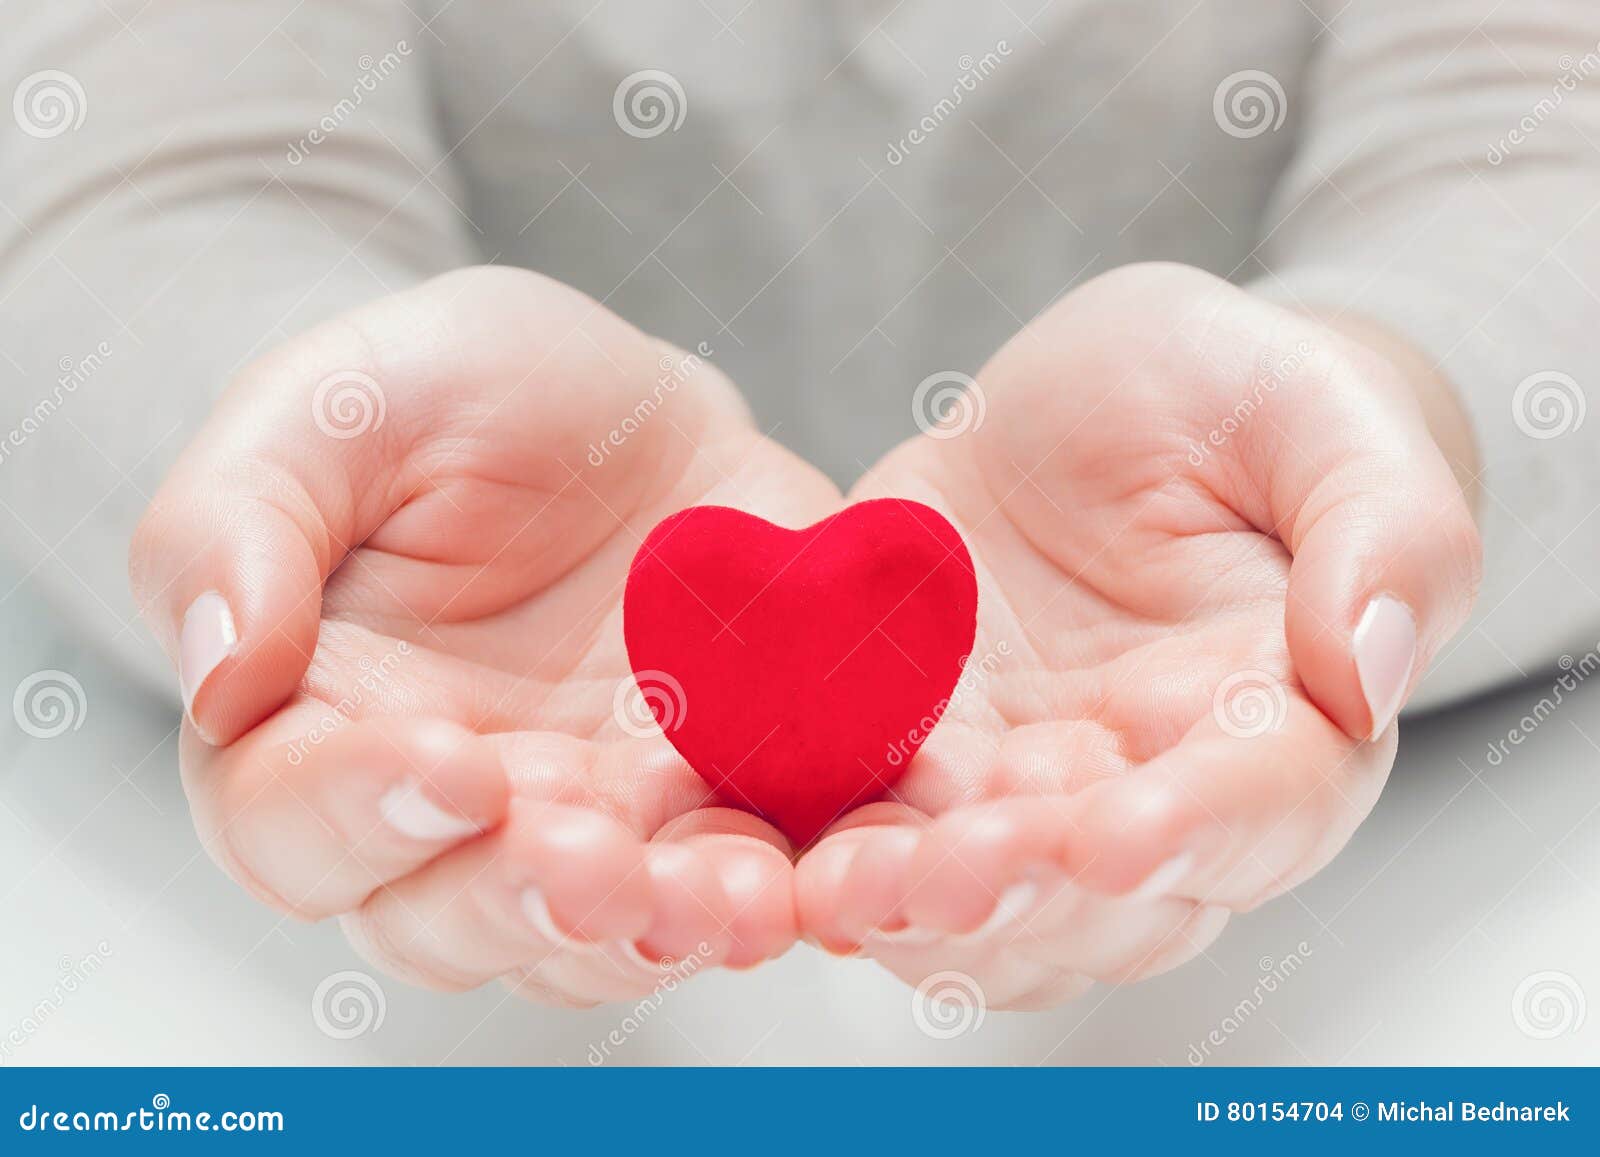 small red heart in woman`s hands in a gesture of giving, protecting